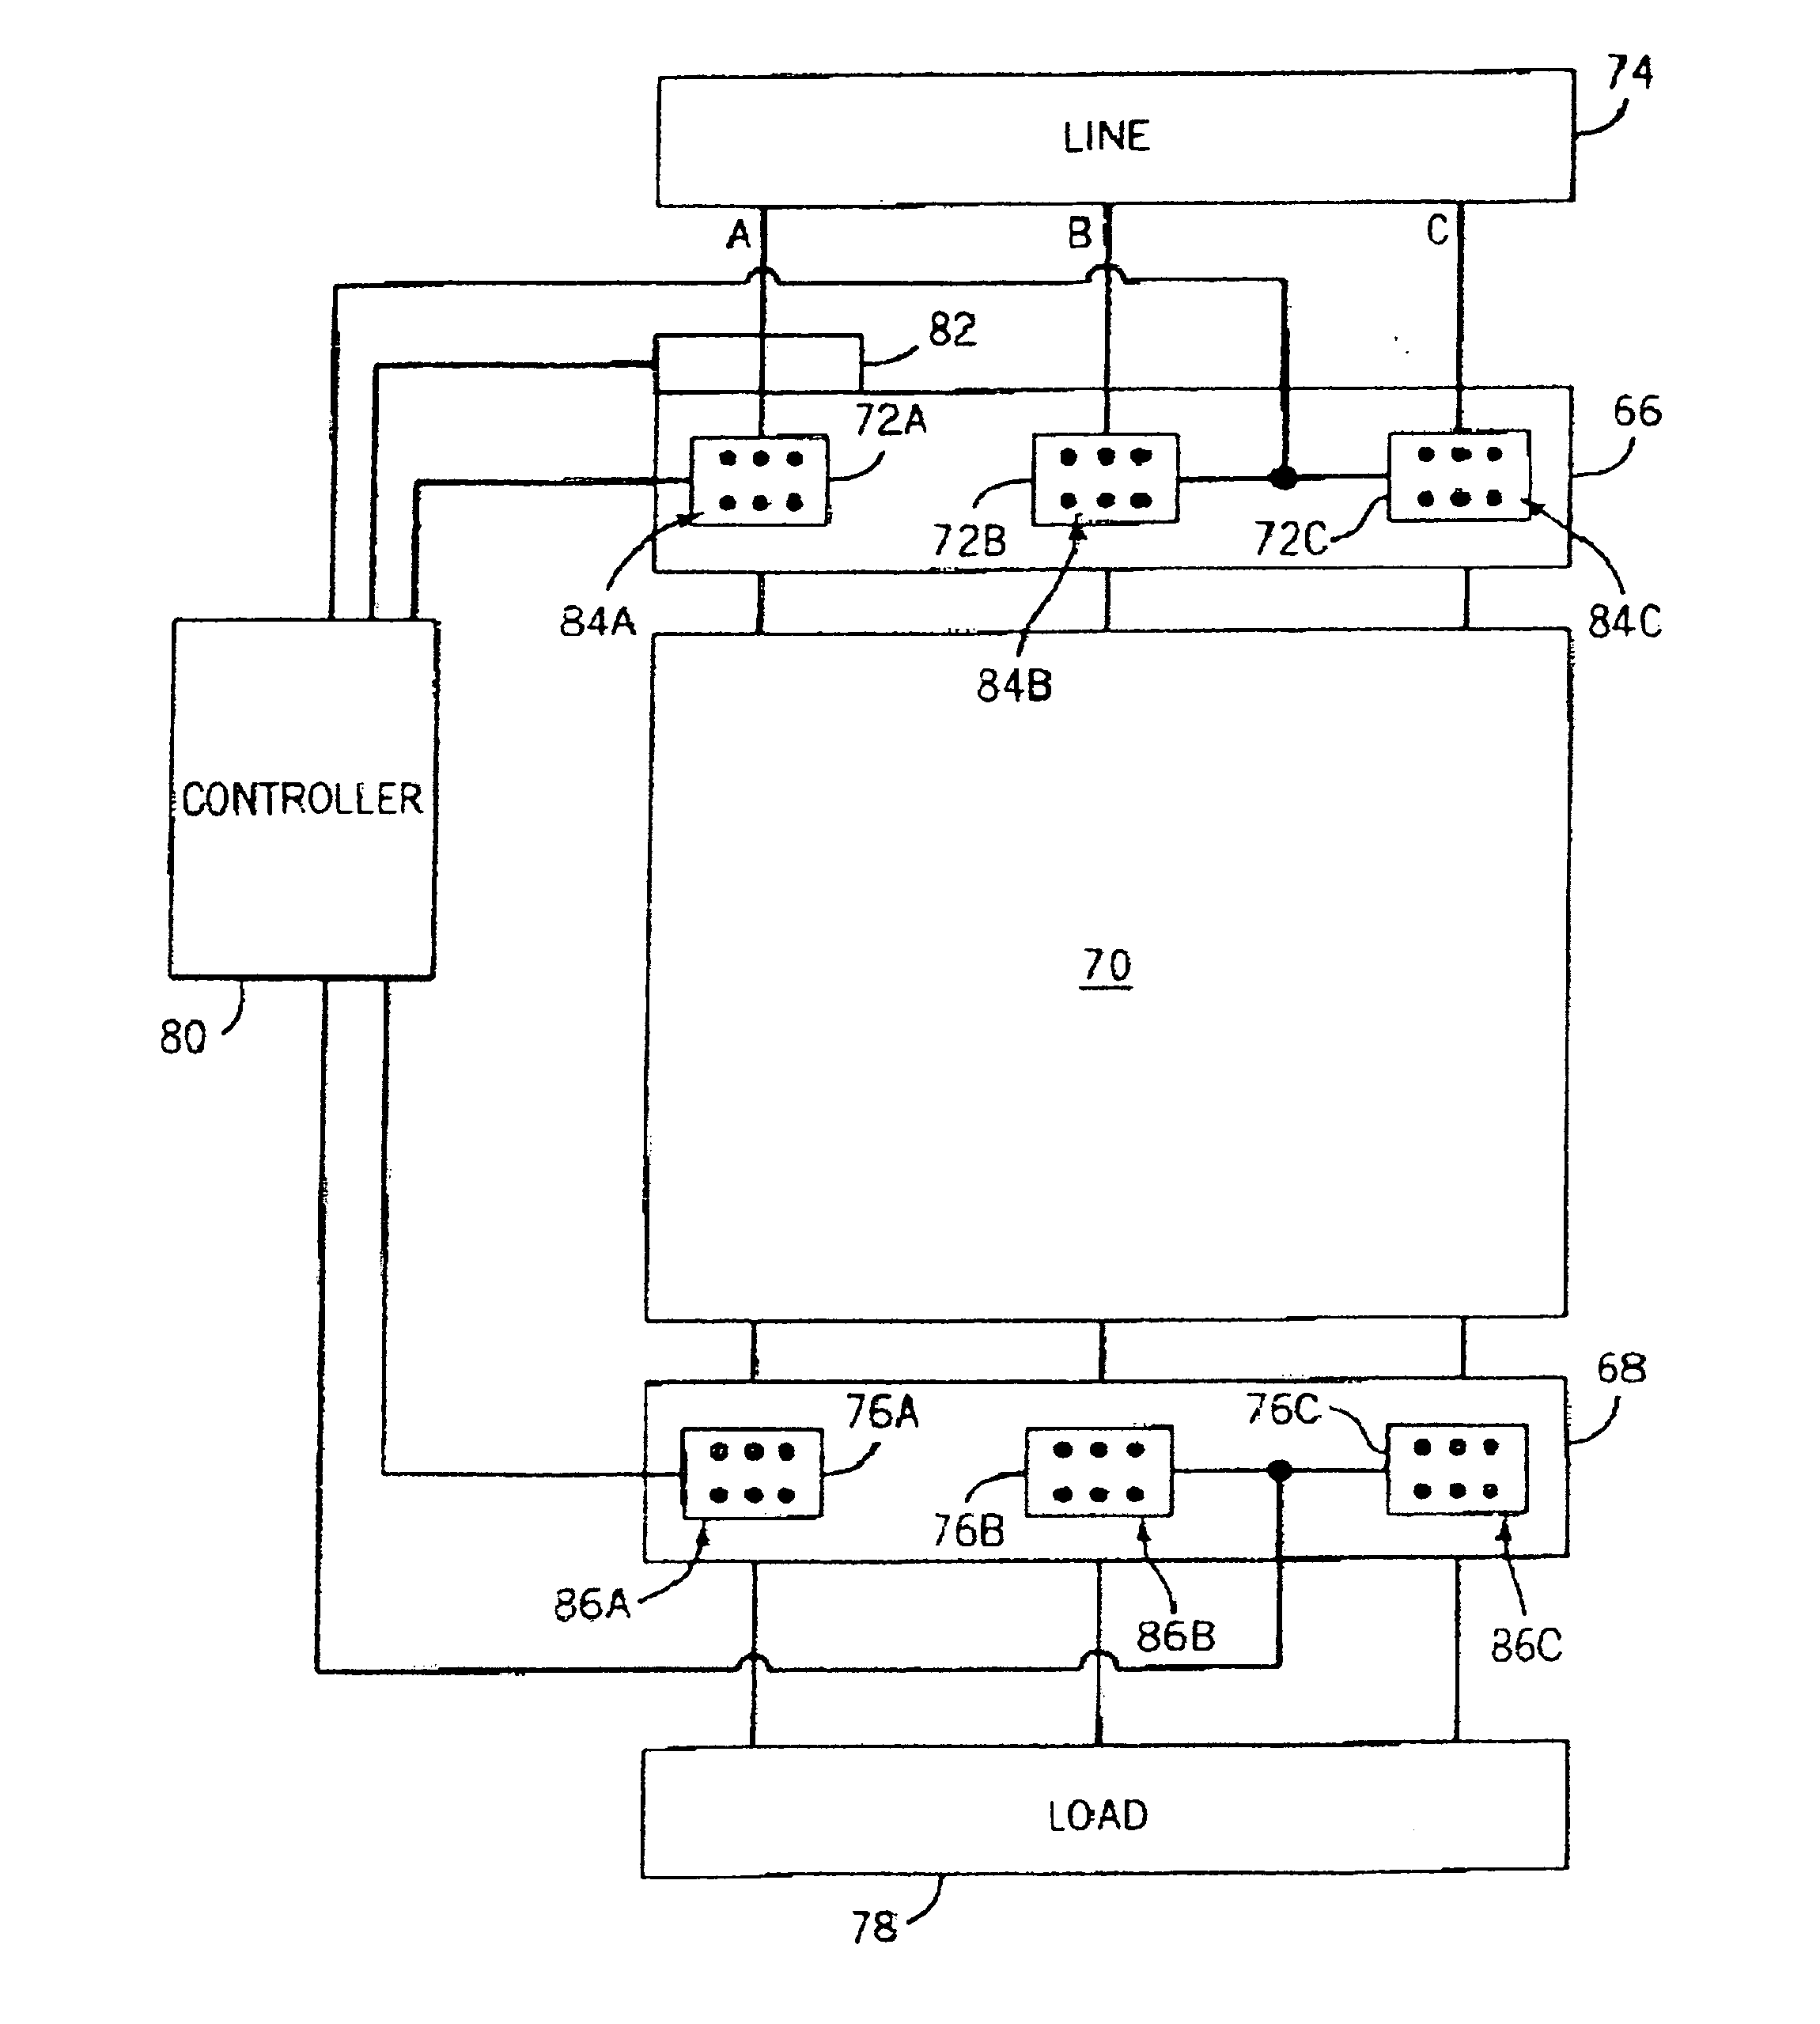 Method and system of controlling asynchronous contactors for a multi-phase electric load